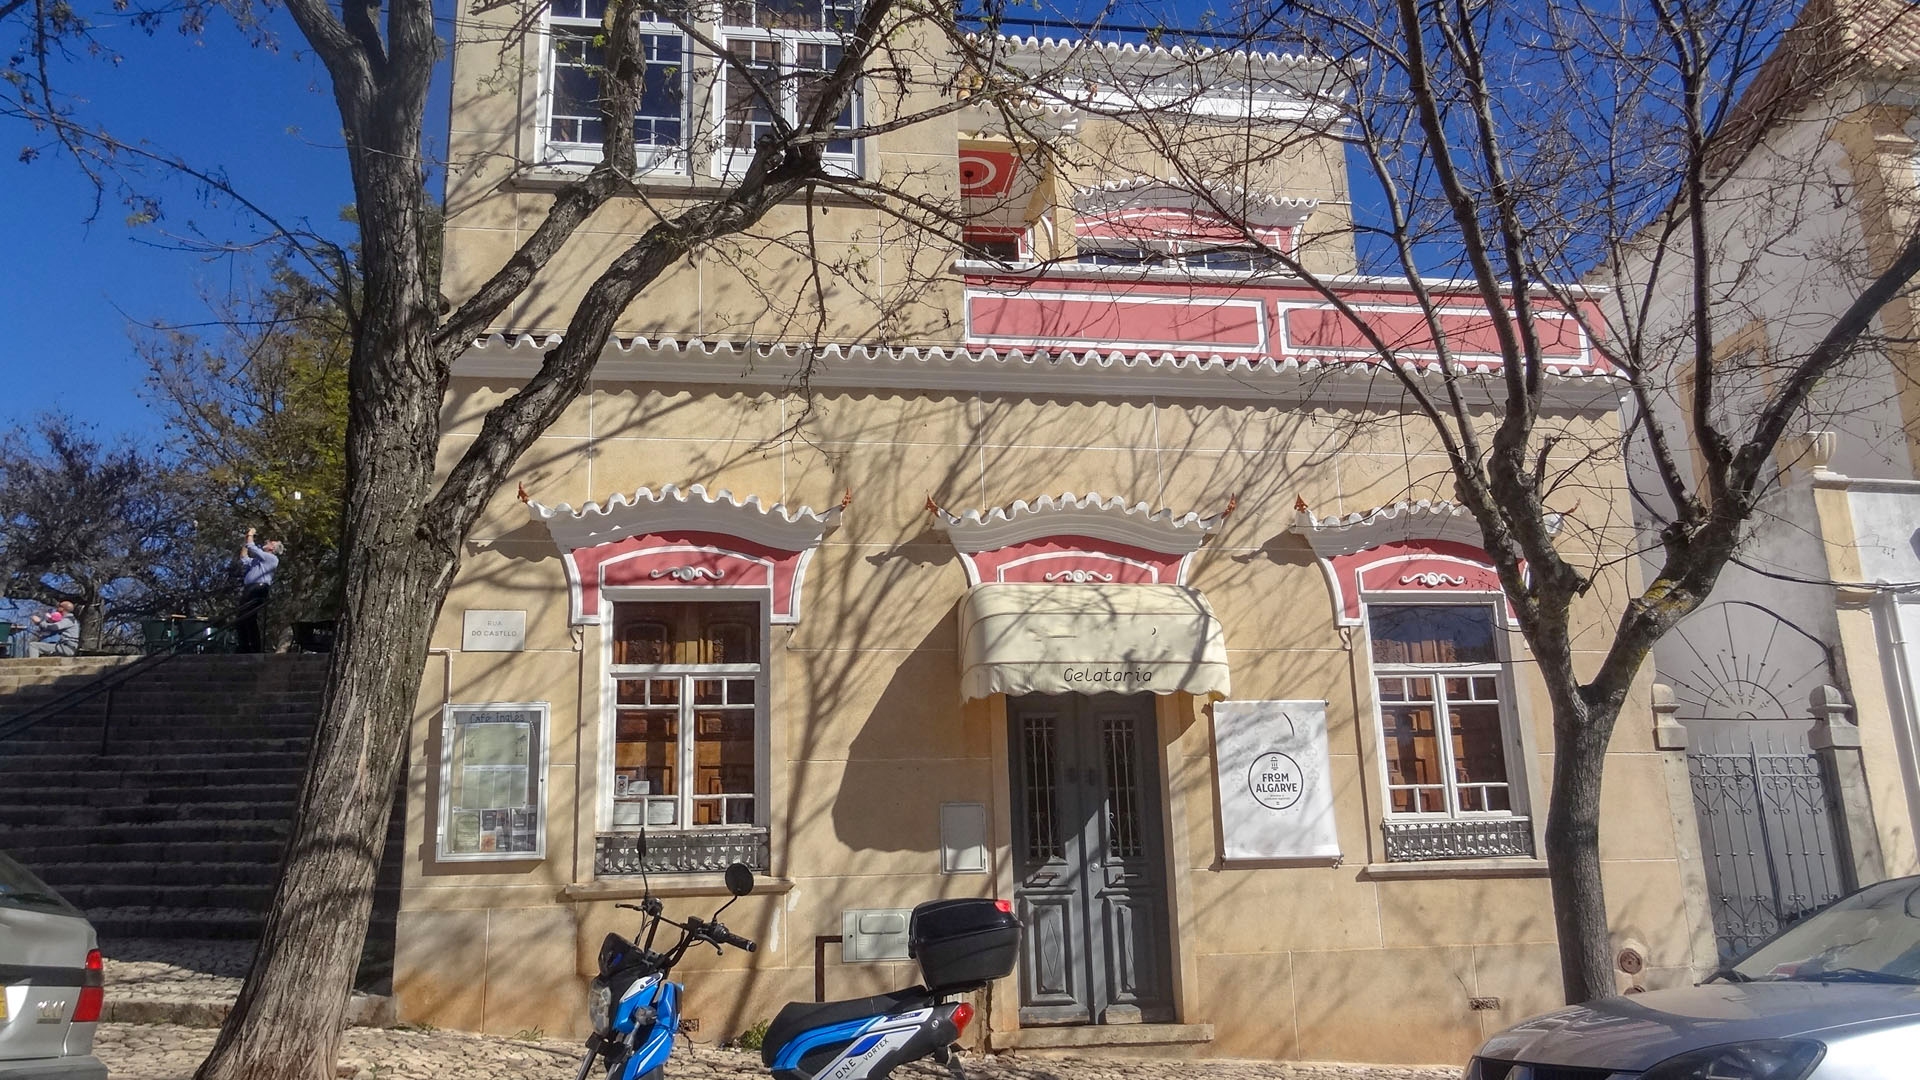 Well established, successful grand café and restaurant in top location in Silves | LG1077 Very popular cafe restaurant on top location in the medieval city centre of Silves ready to continue a successful business or to convert into something else with endless possibilities.